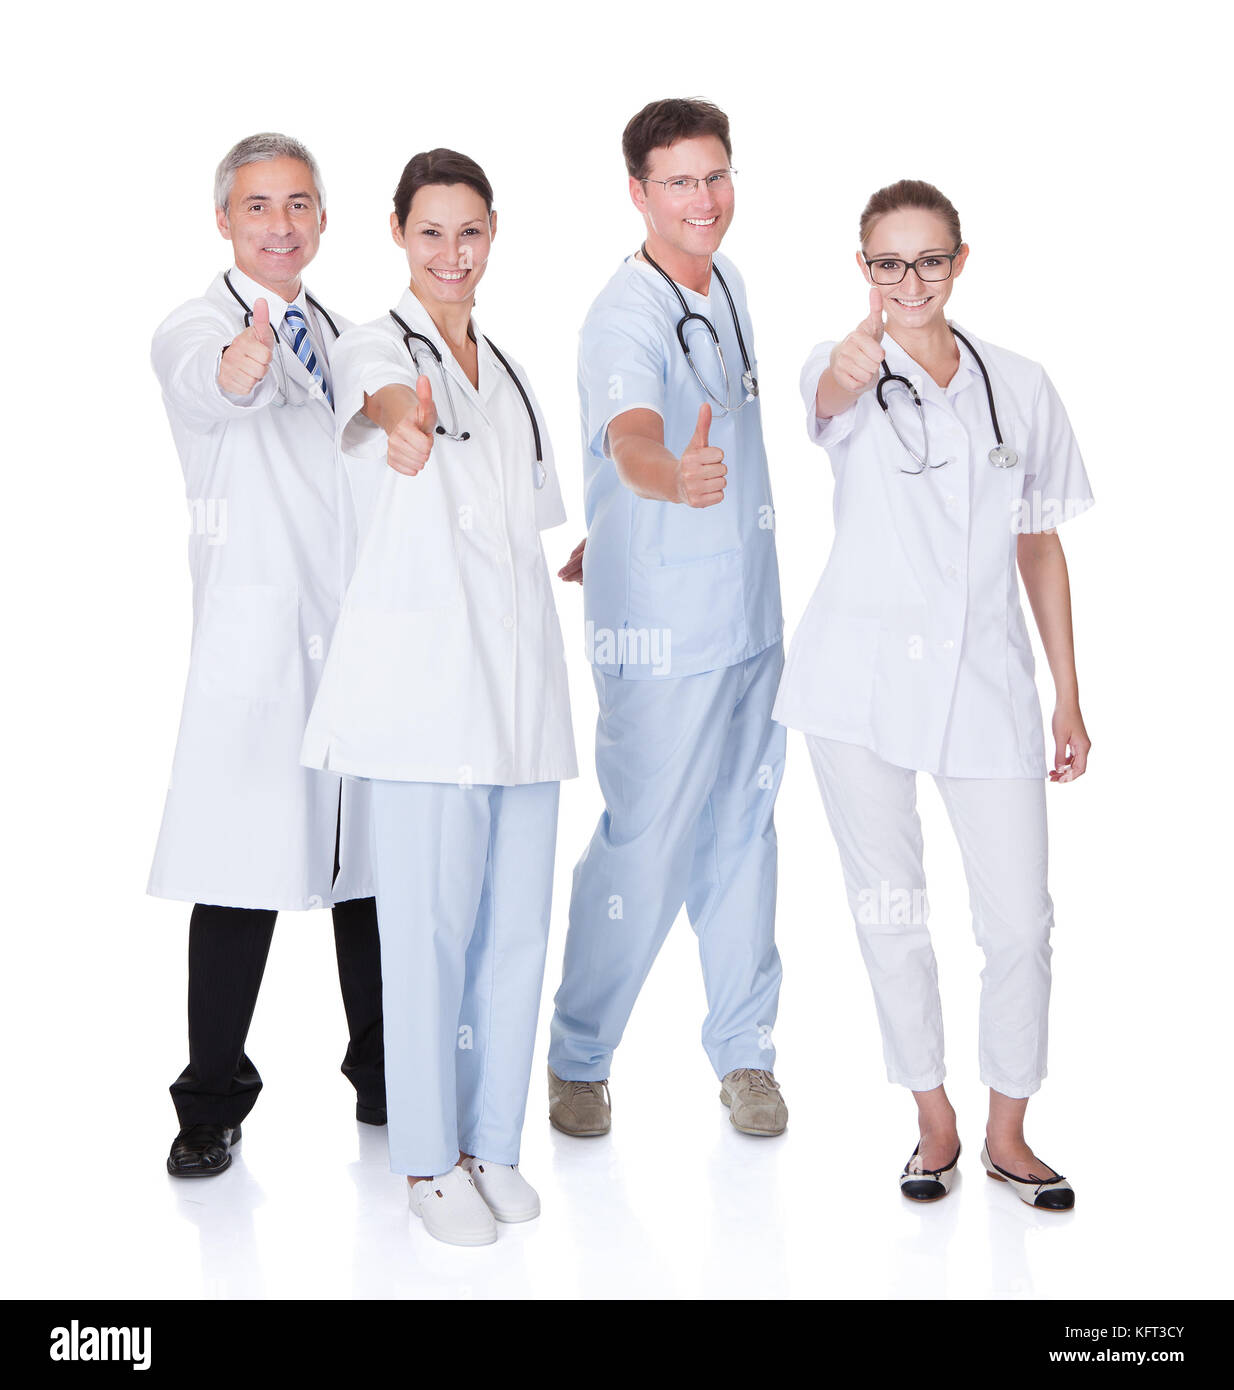 Group of four medical professionals with a male doctor and surgeon and two females doctors on a white studio background Stock Photo